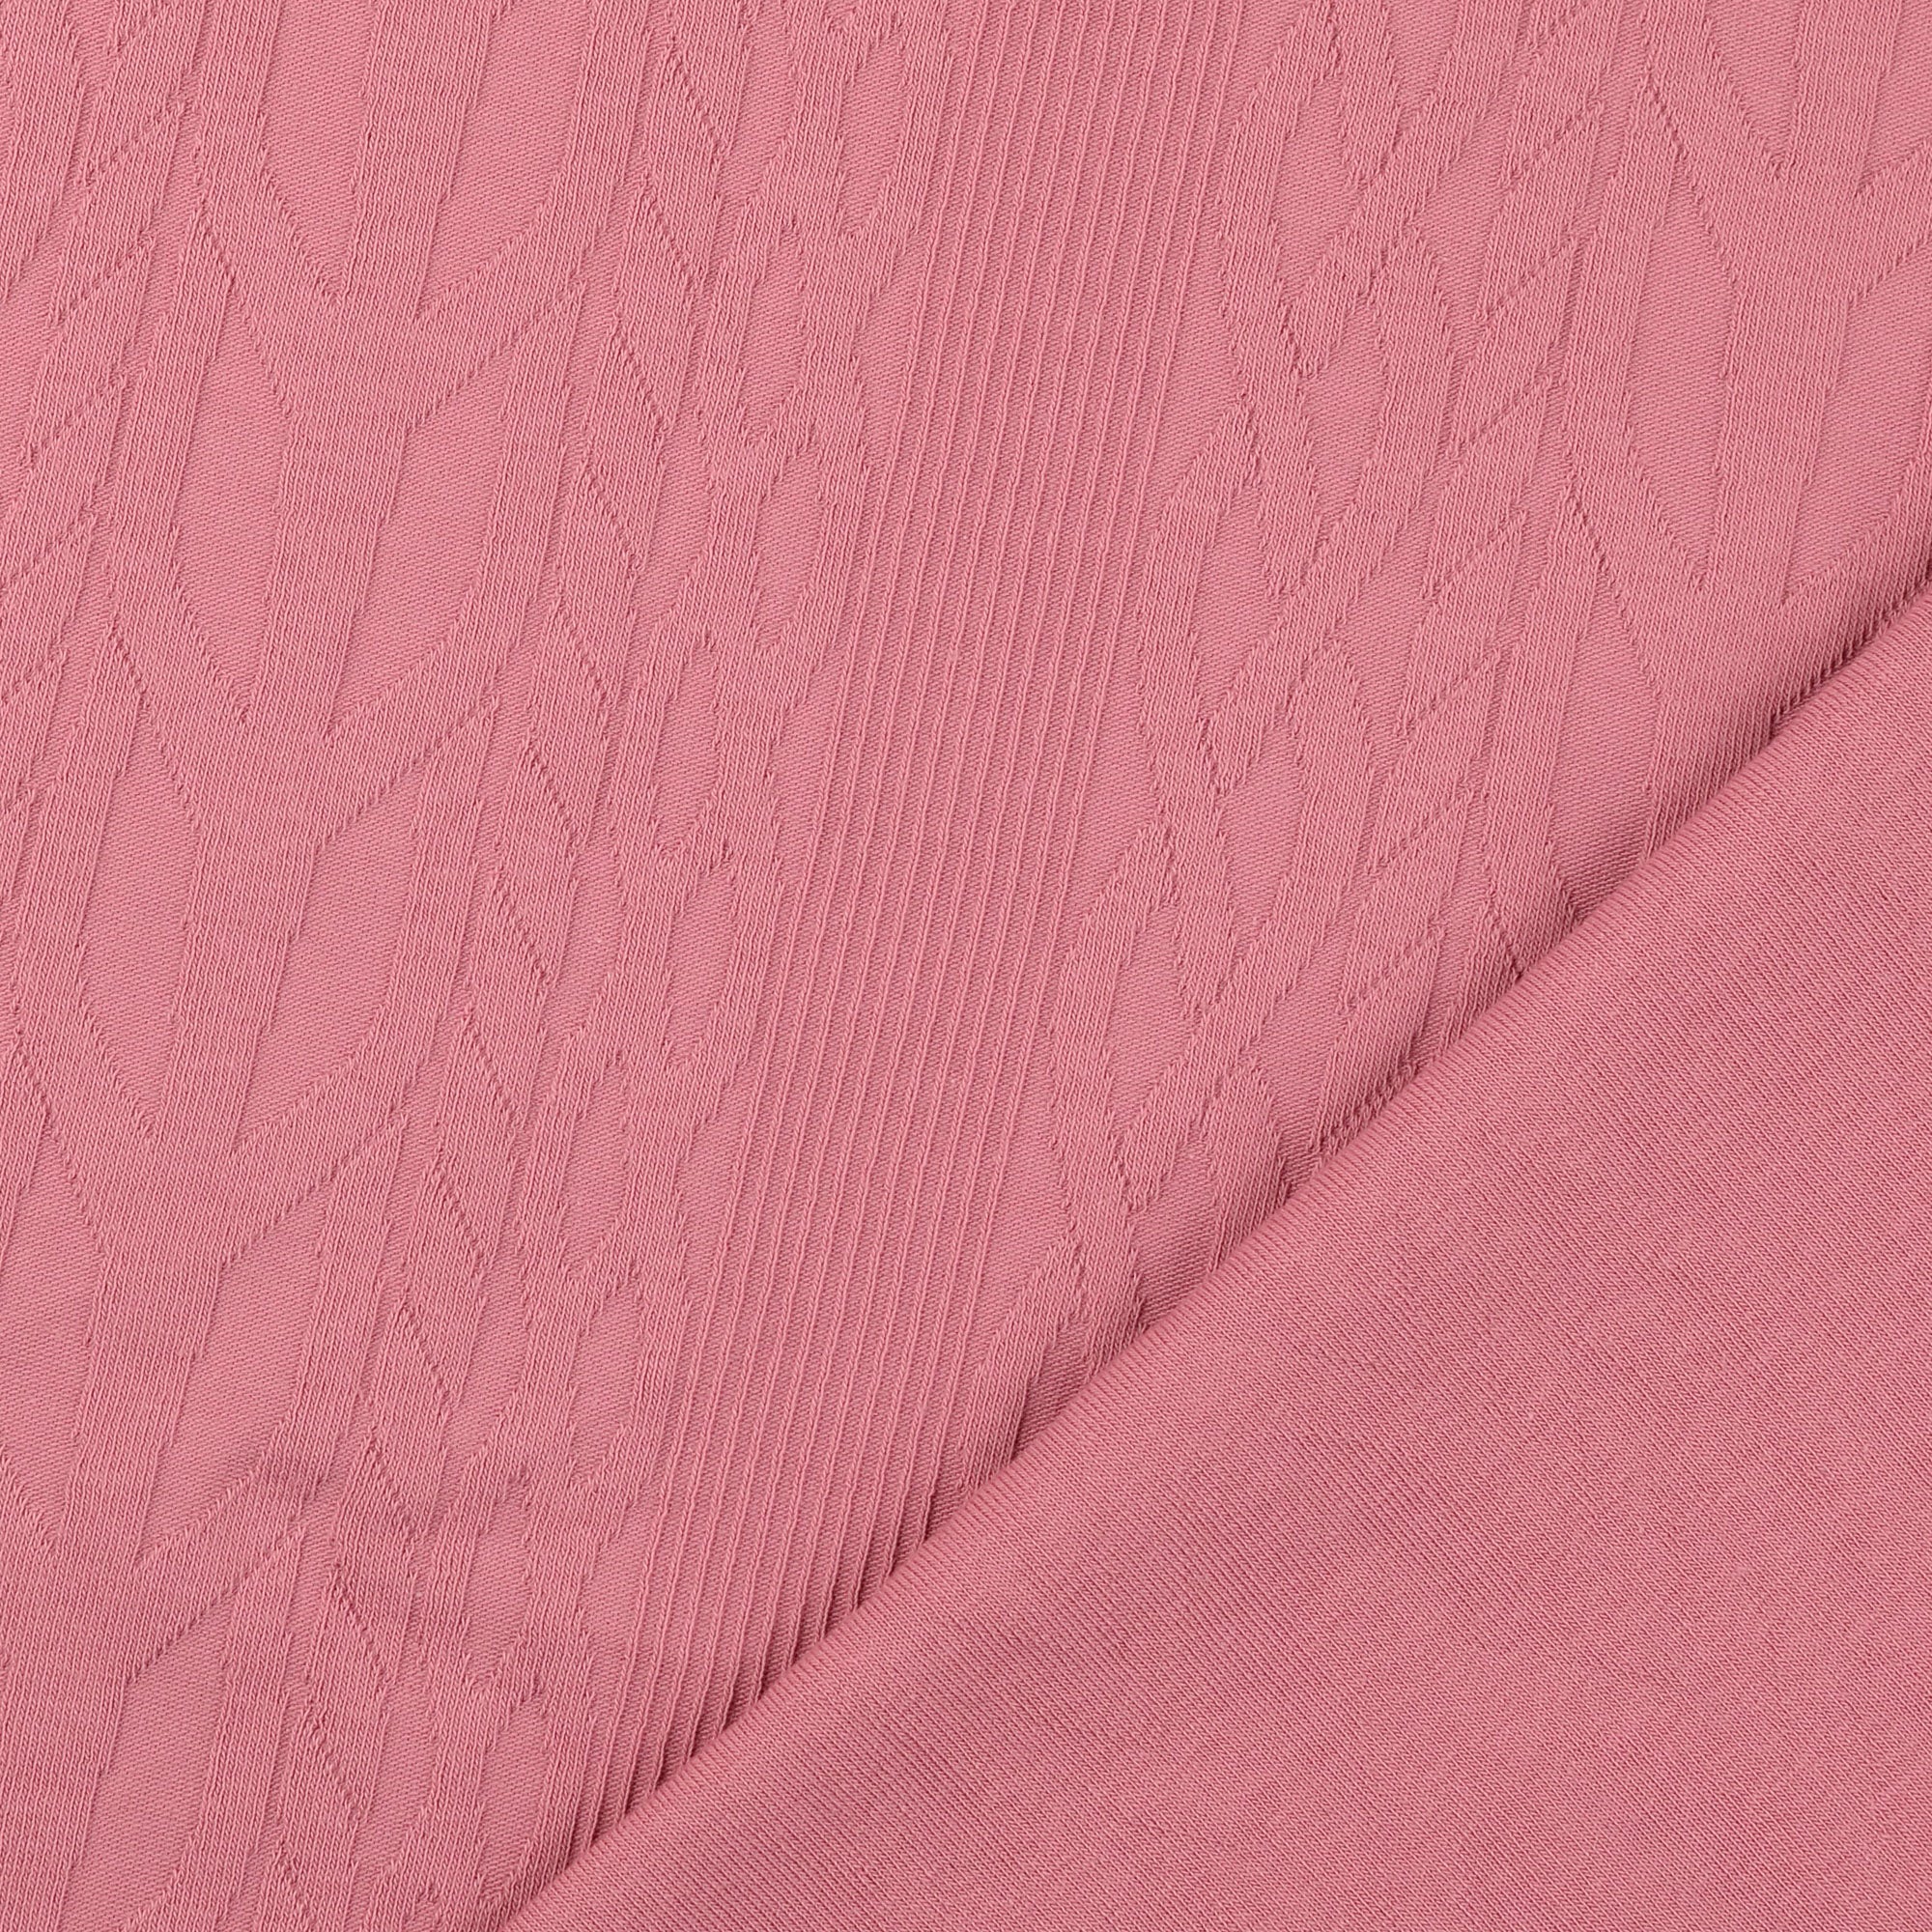 REMNANT 1.57 Metre - Cotton Cable Knit Fabric in Pink